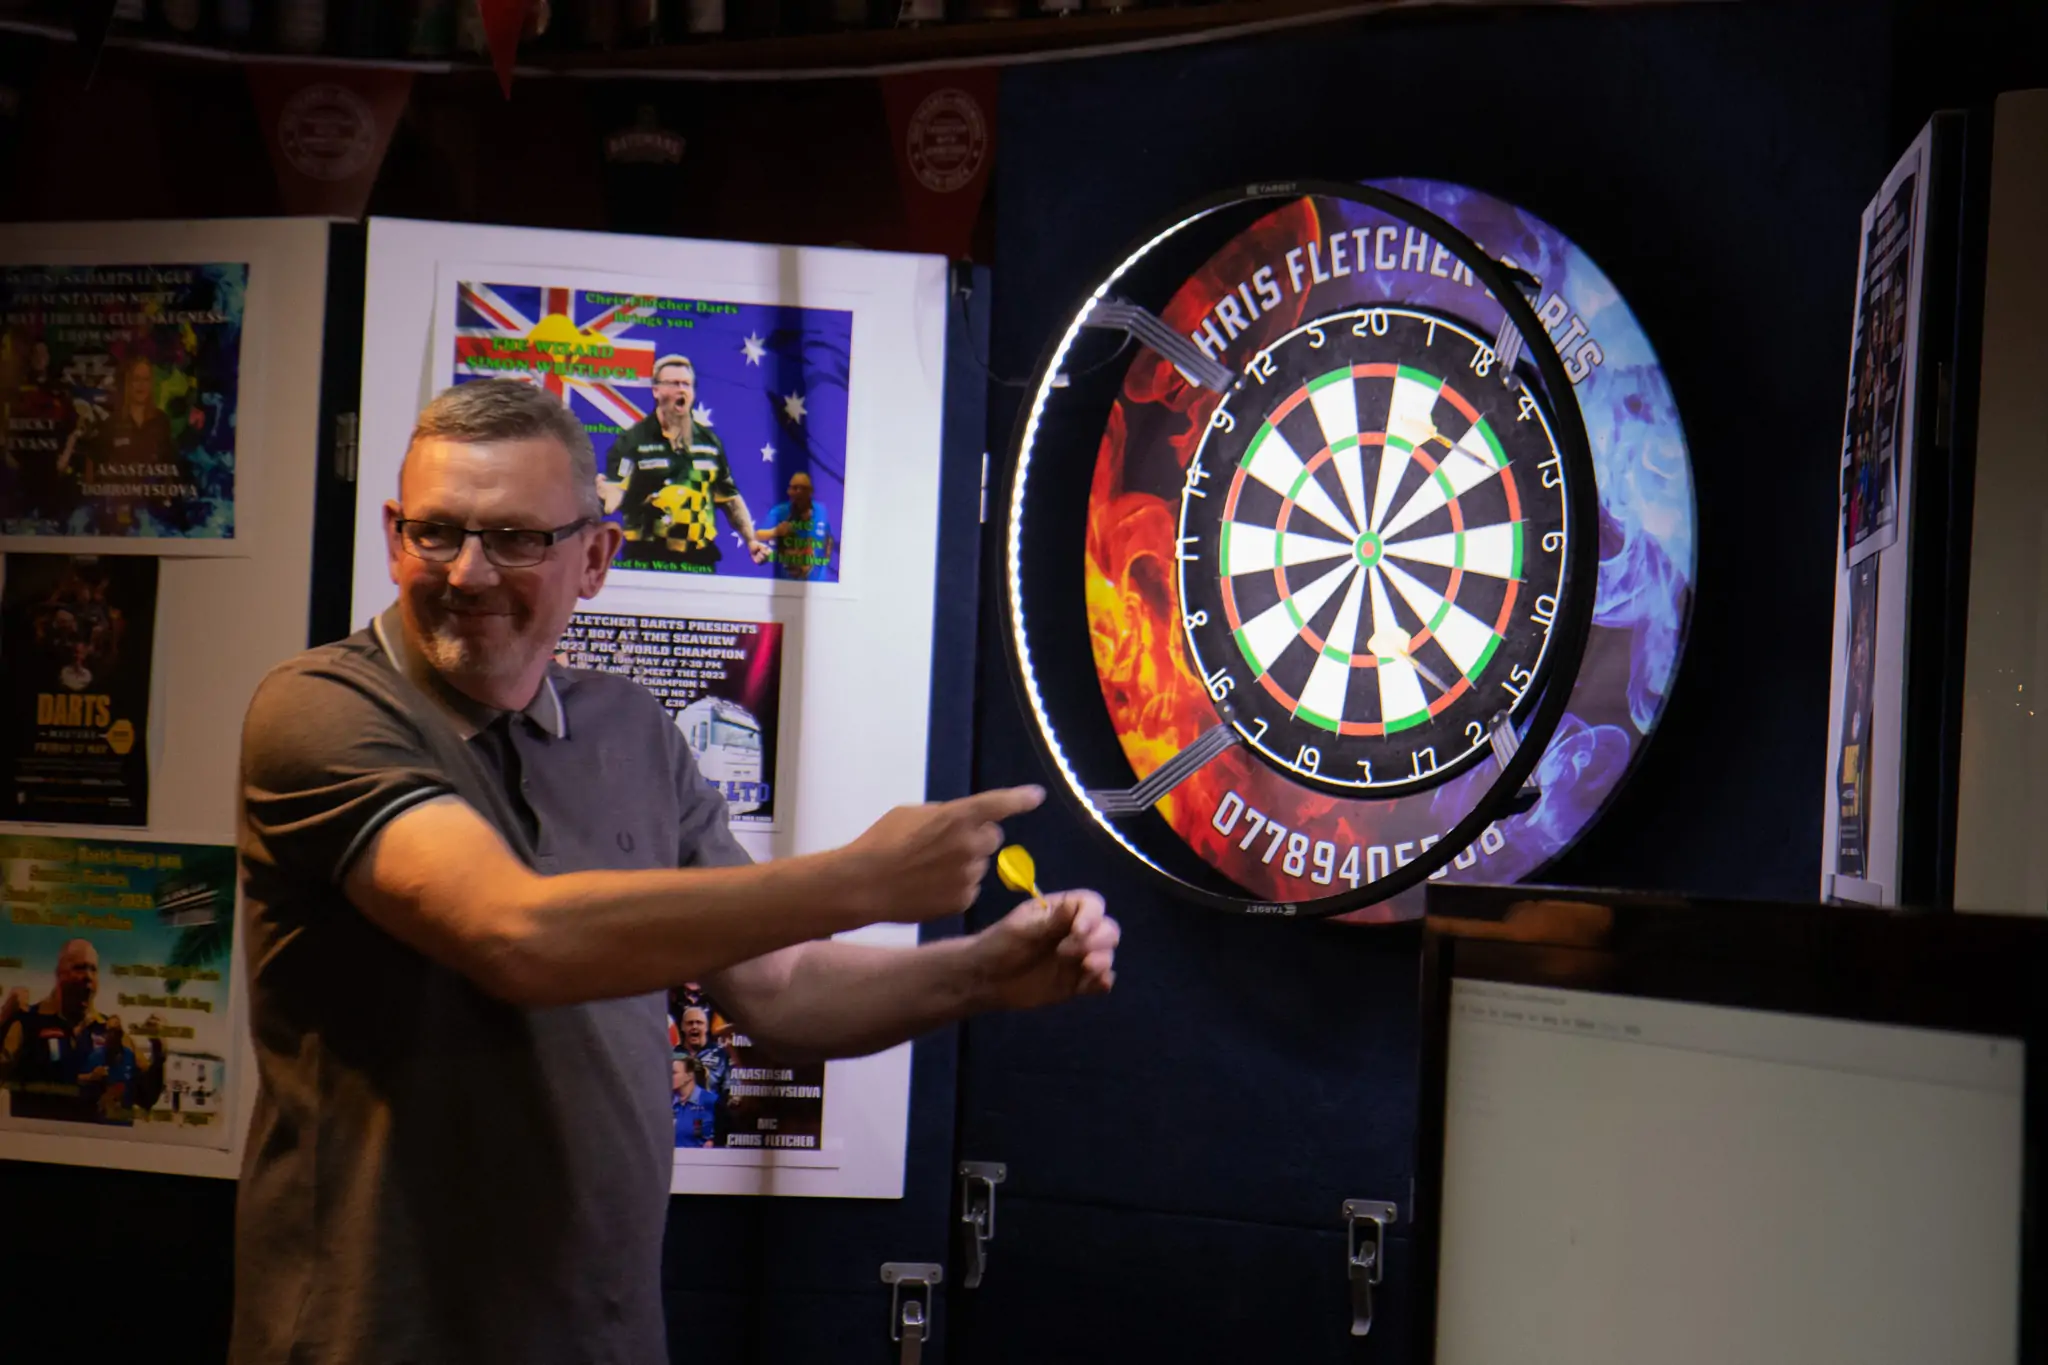 Peter Manley Pro Darts Player at the Batemans 150th anniversary celebrations darts with one of the competitors Martin Bell.